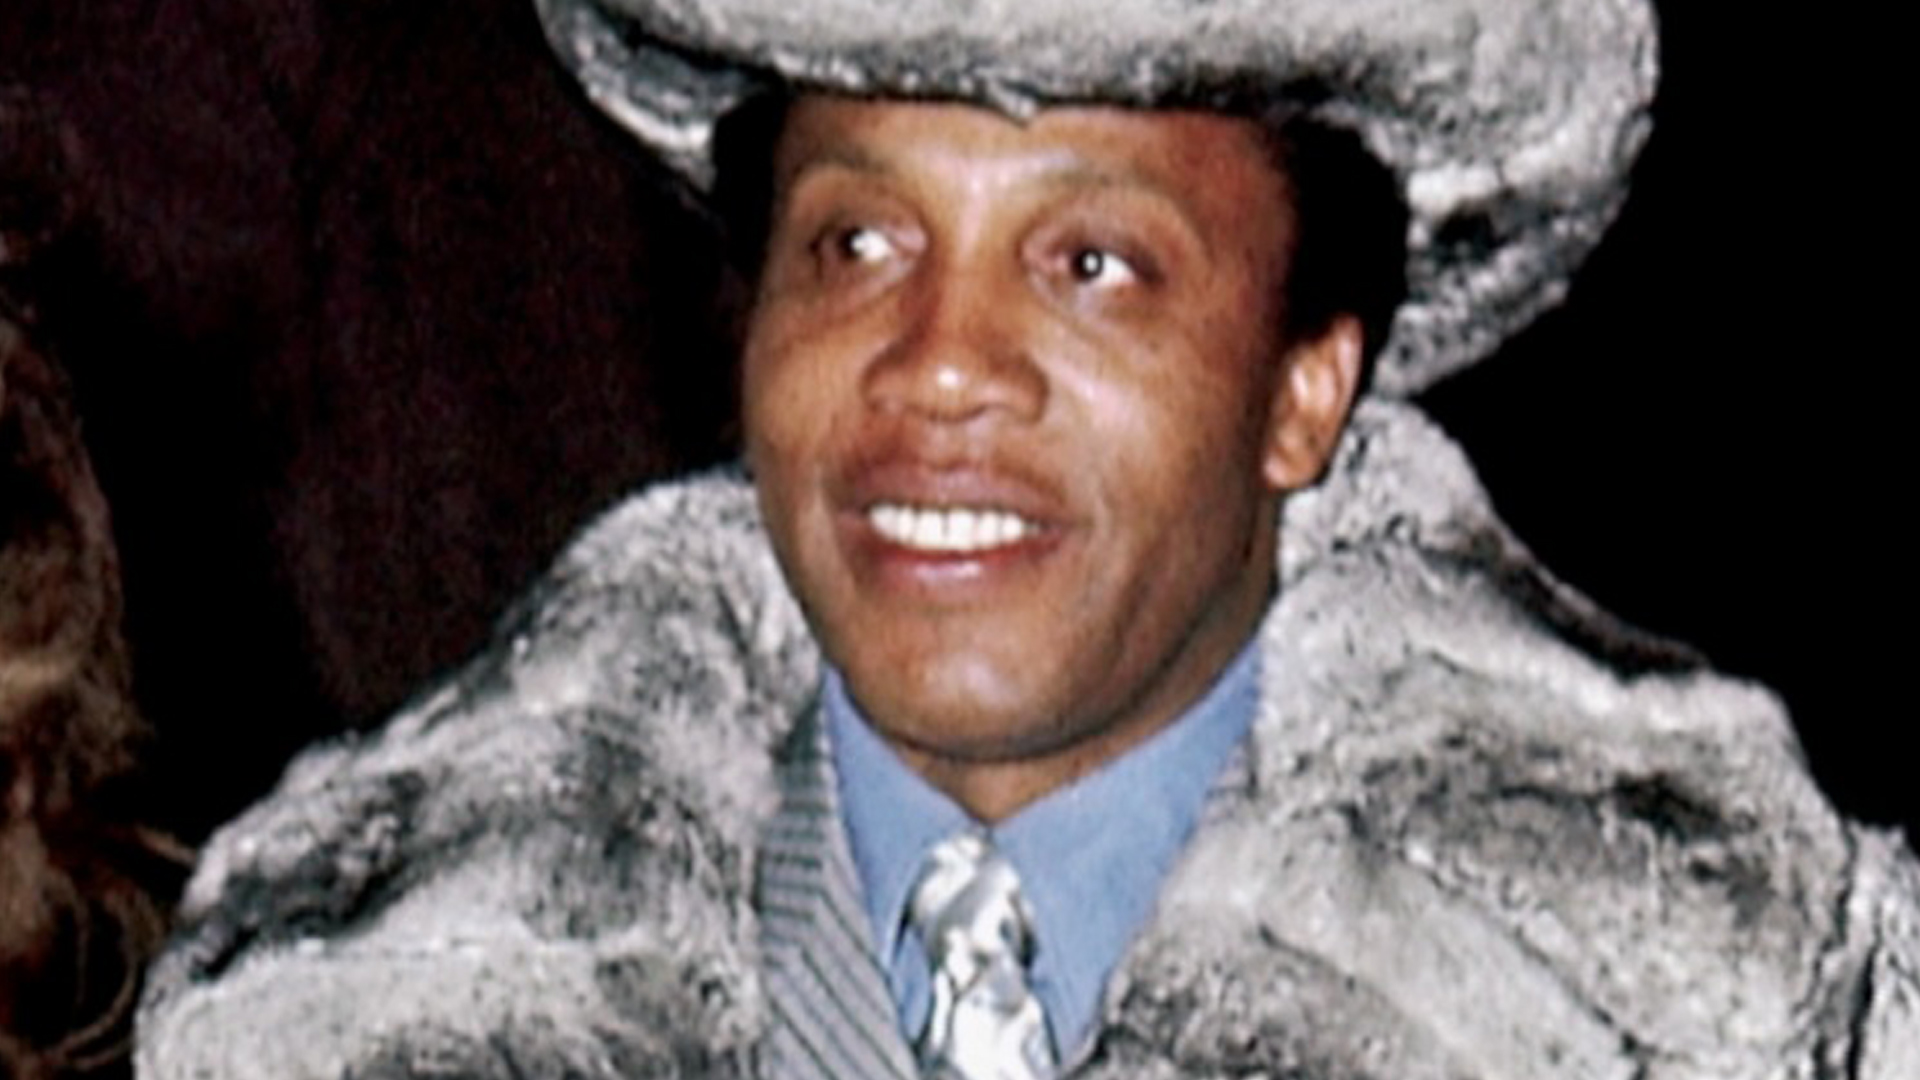 Godfather Of Harlem Frank Lucas Bumpy Johnson And The True Story Behind Godfather Of Harlem 01 27